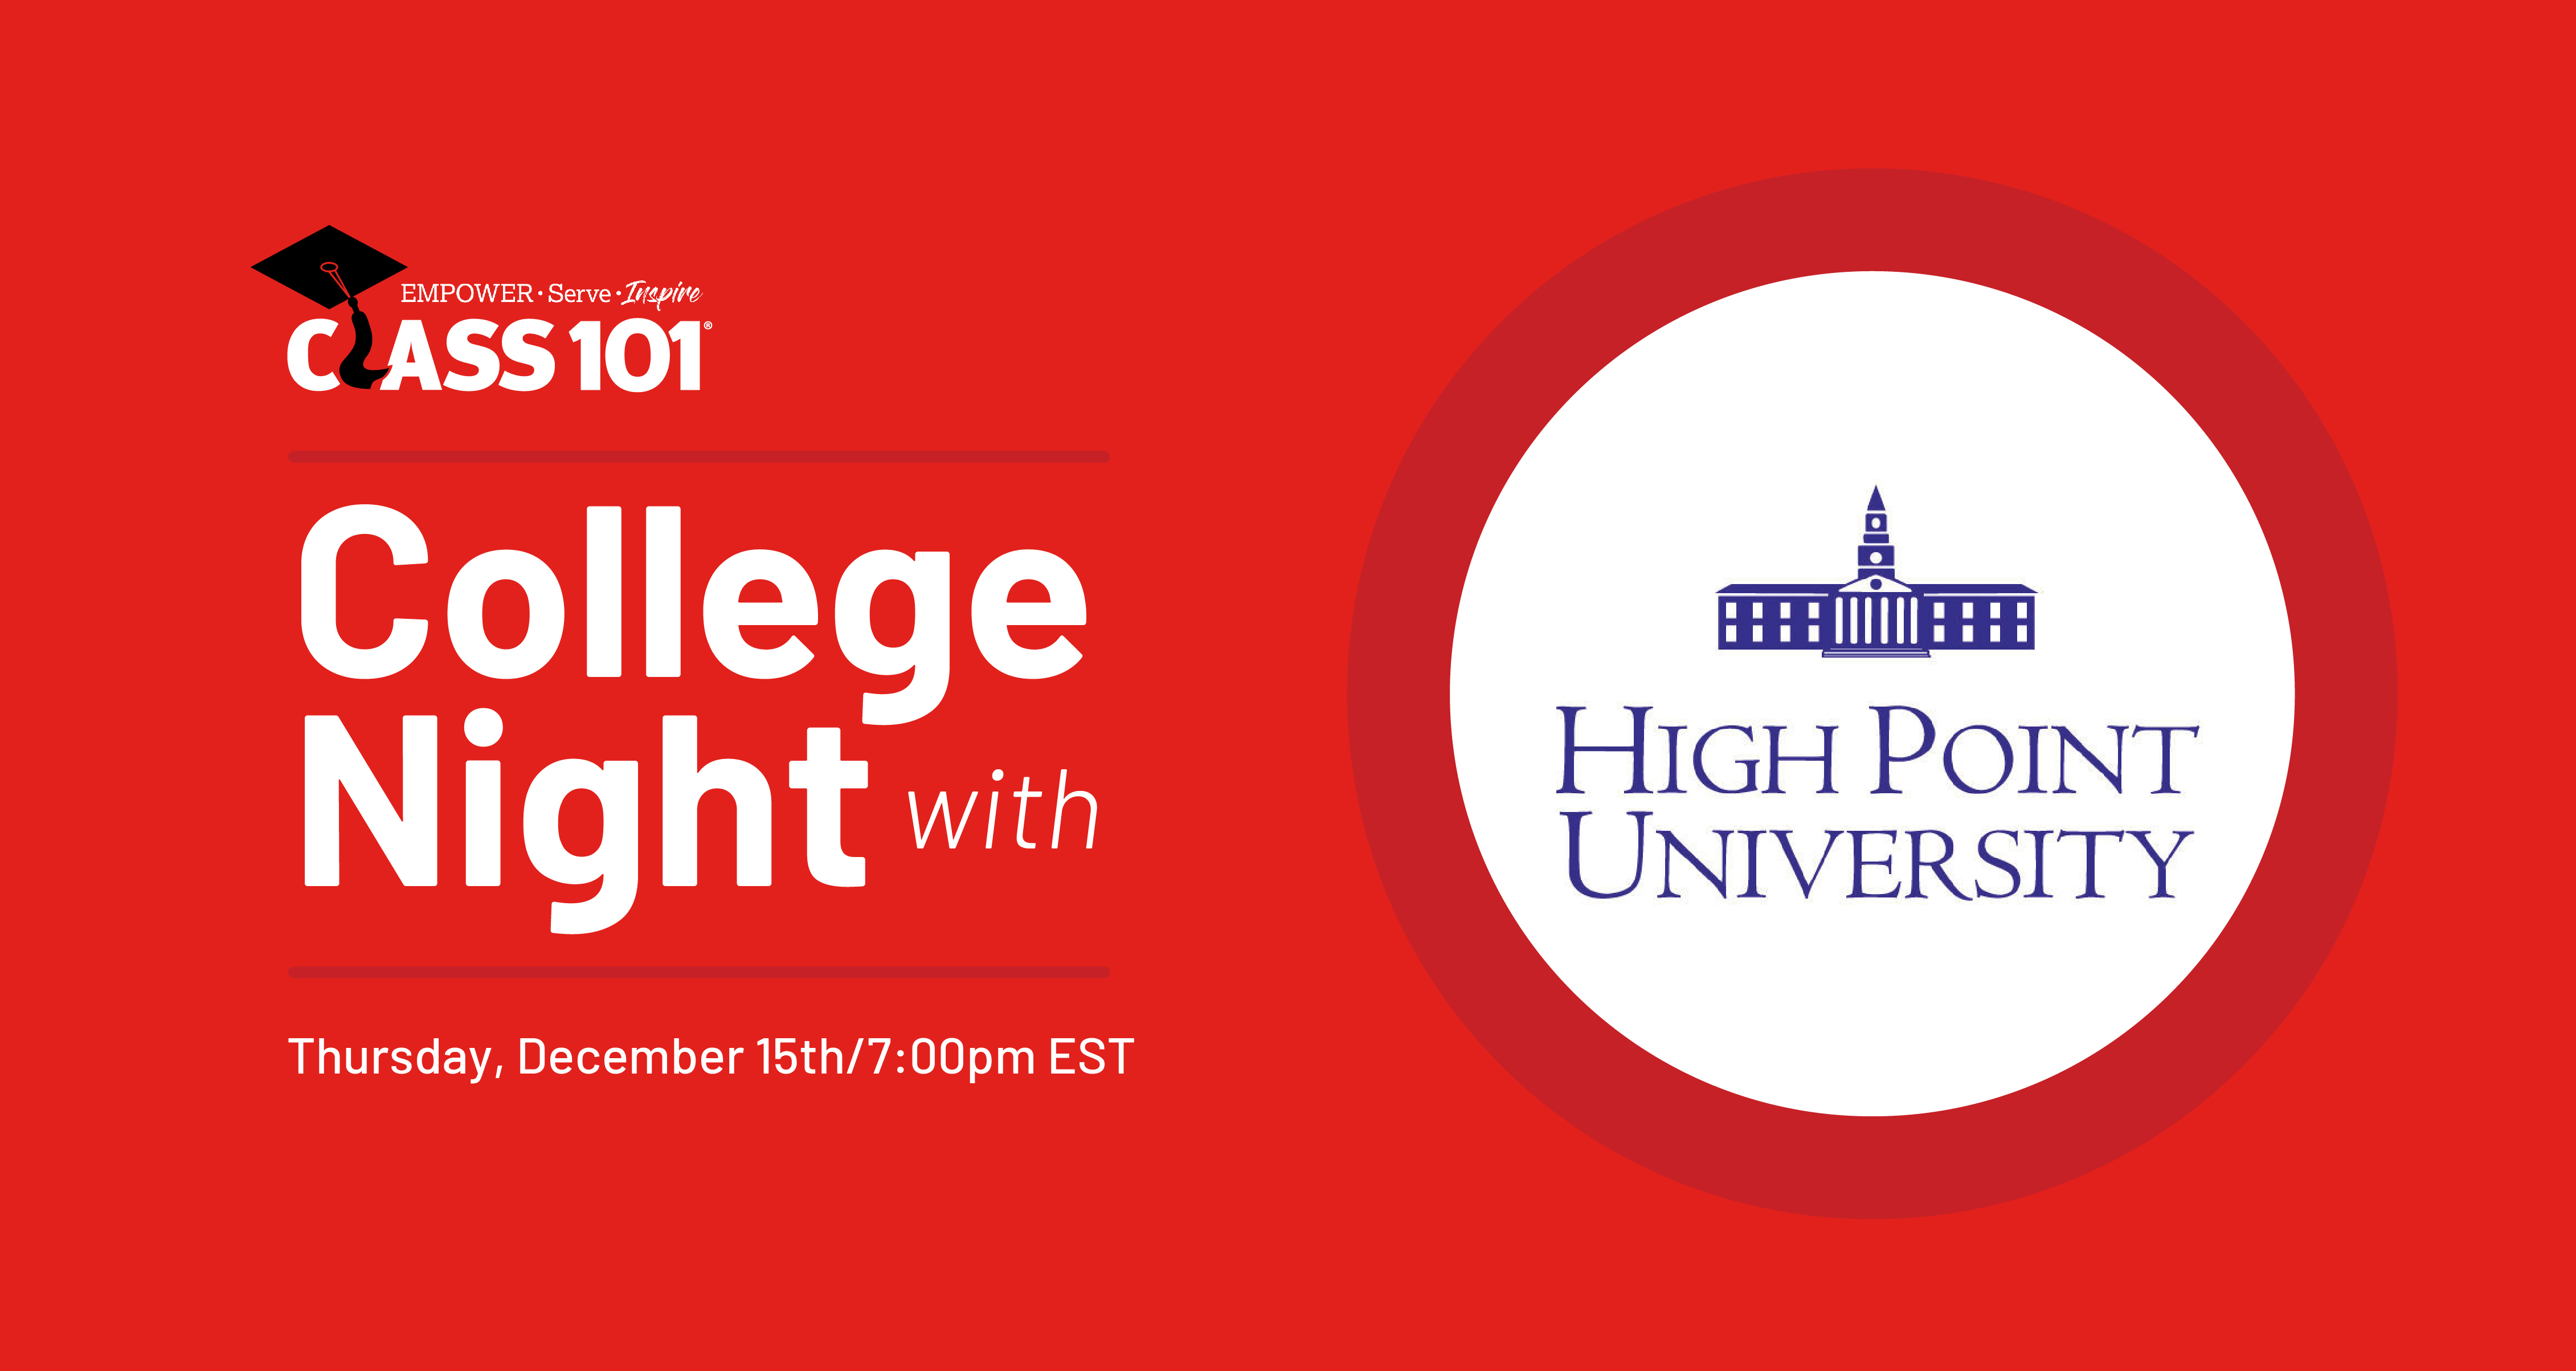 College night with High Point University